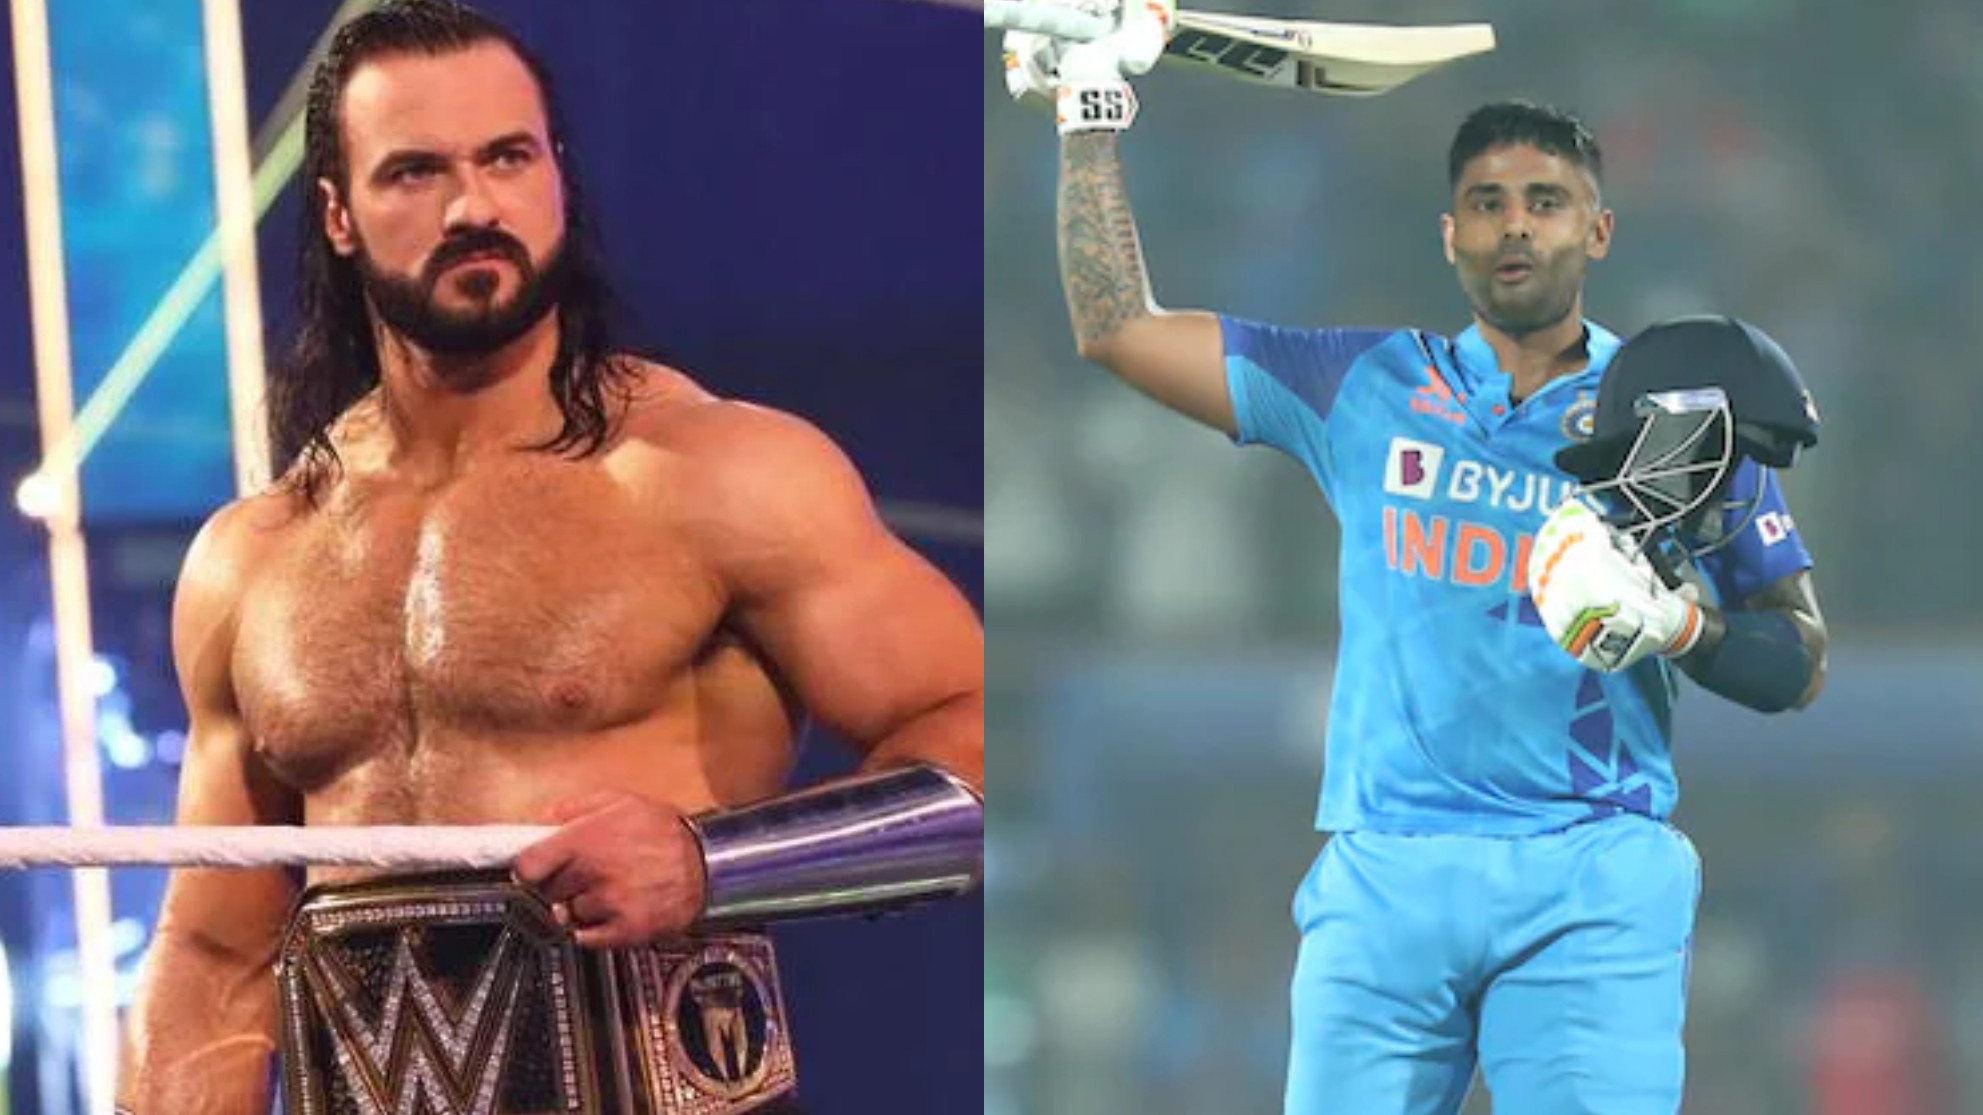 IND v SL 2023: “SKY is a machine!” - WWE superstar Drew McIntyre lauds India’s Suryakumar Yadav after his 3rd T20I ton